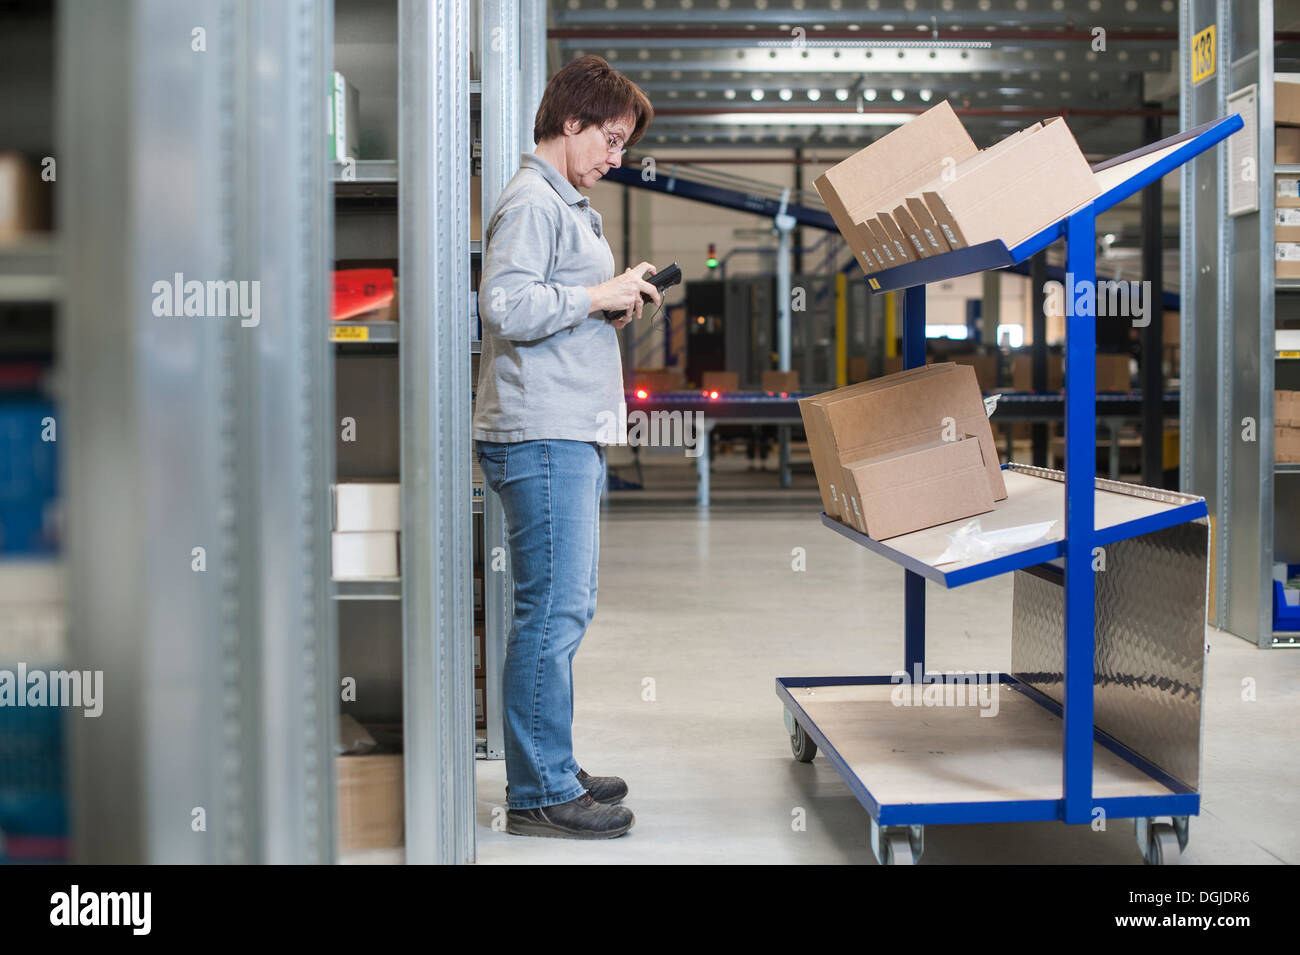 Female warehouse worker checking orders on distribution trolley Stock Photo